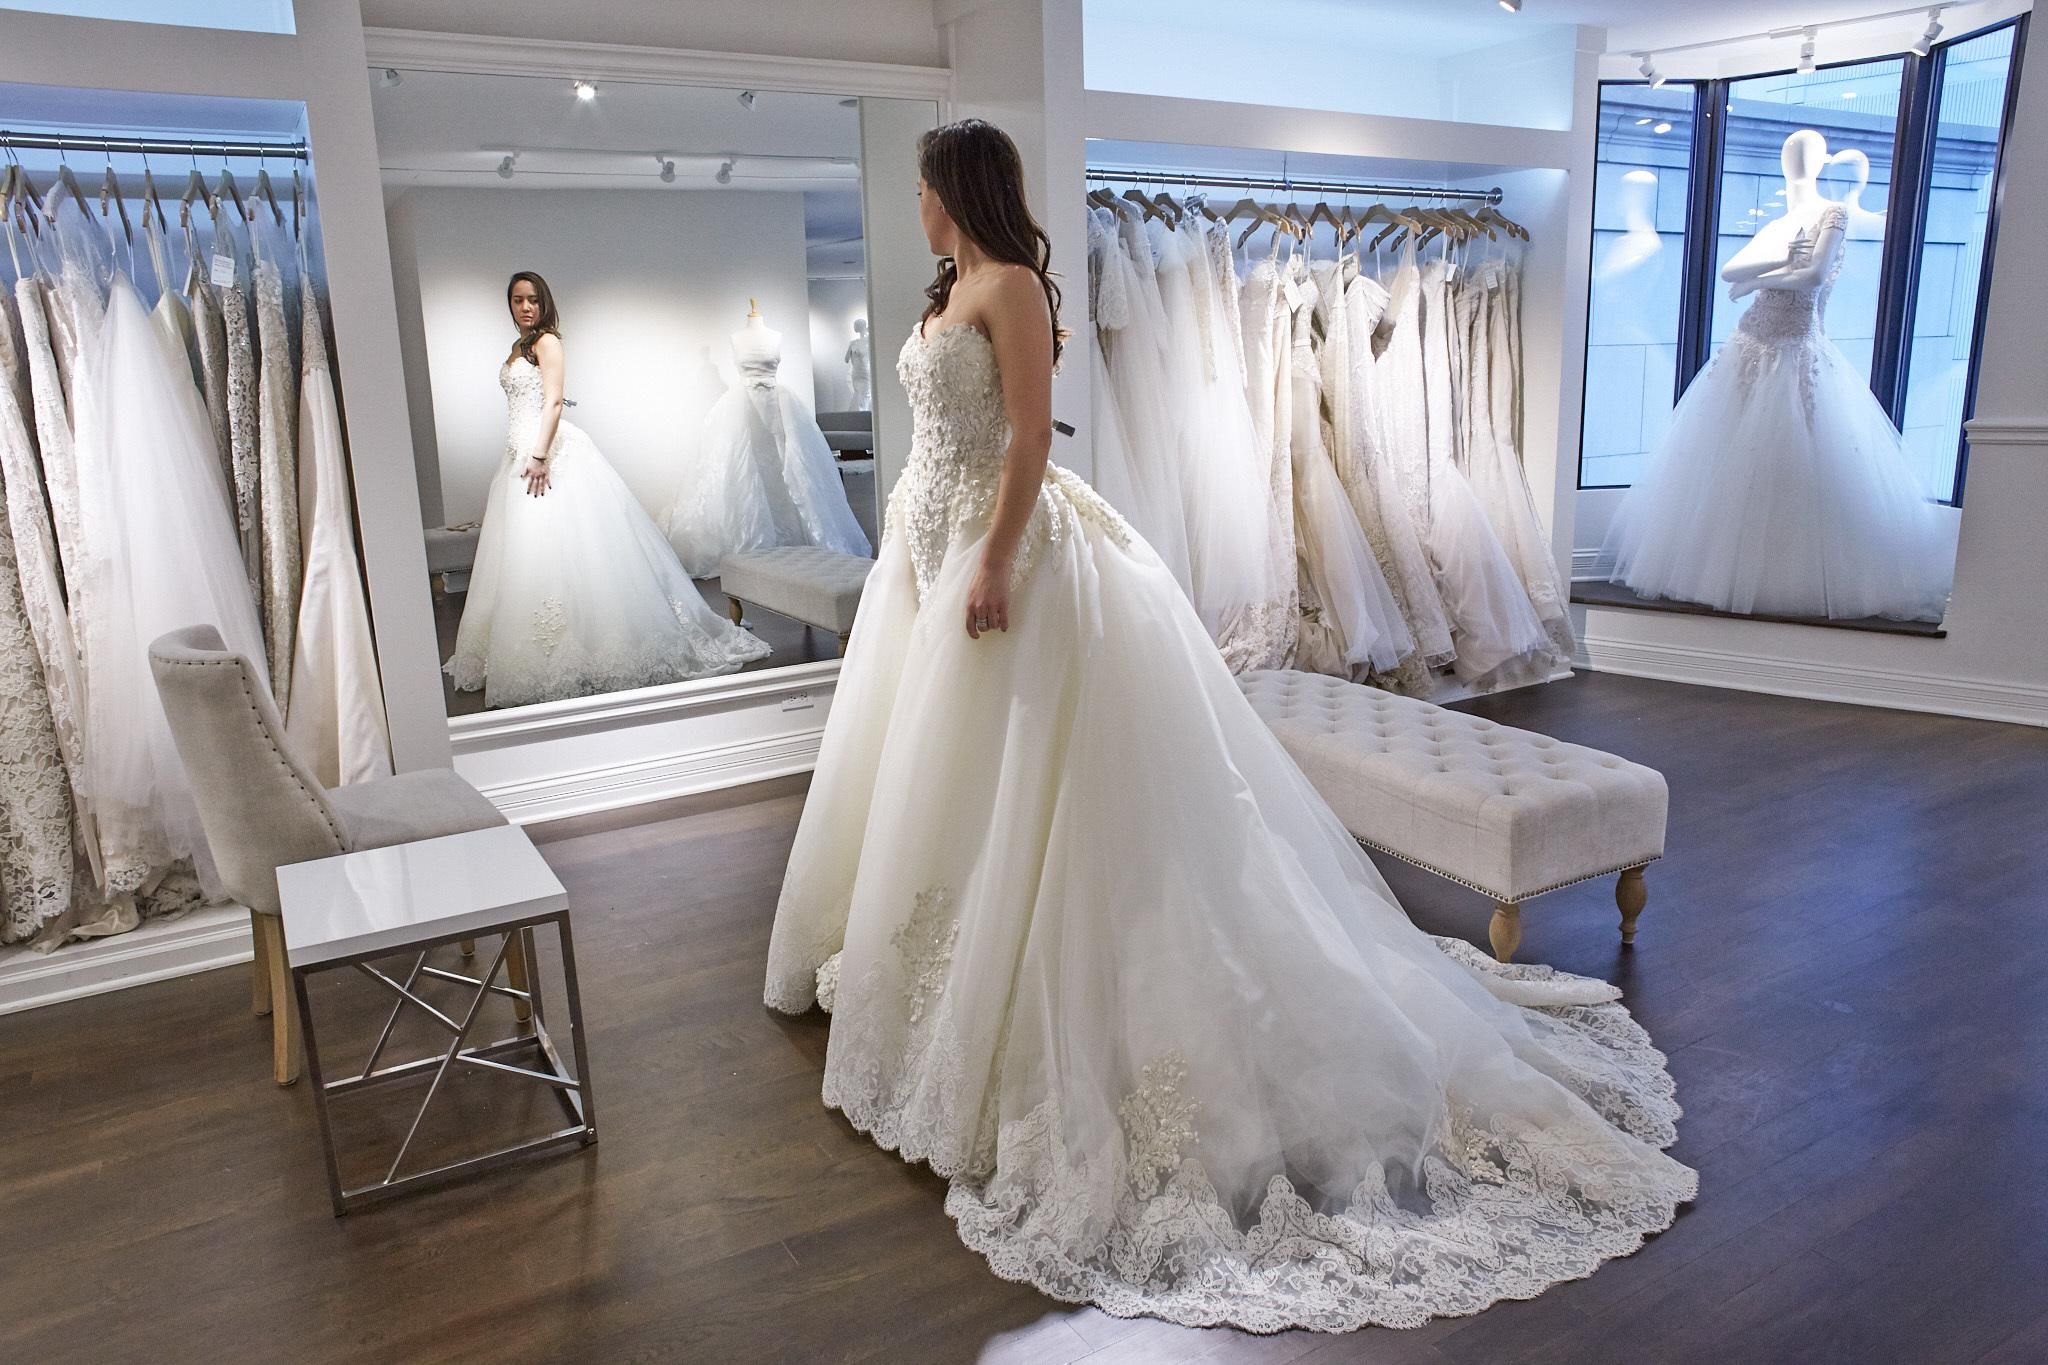 Thoughtful Wedding Dress Shopping in Chicago